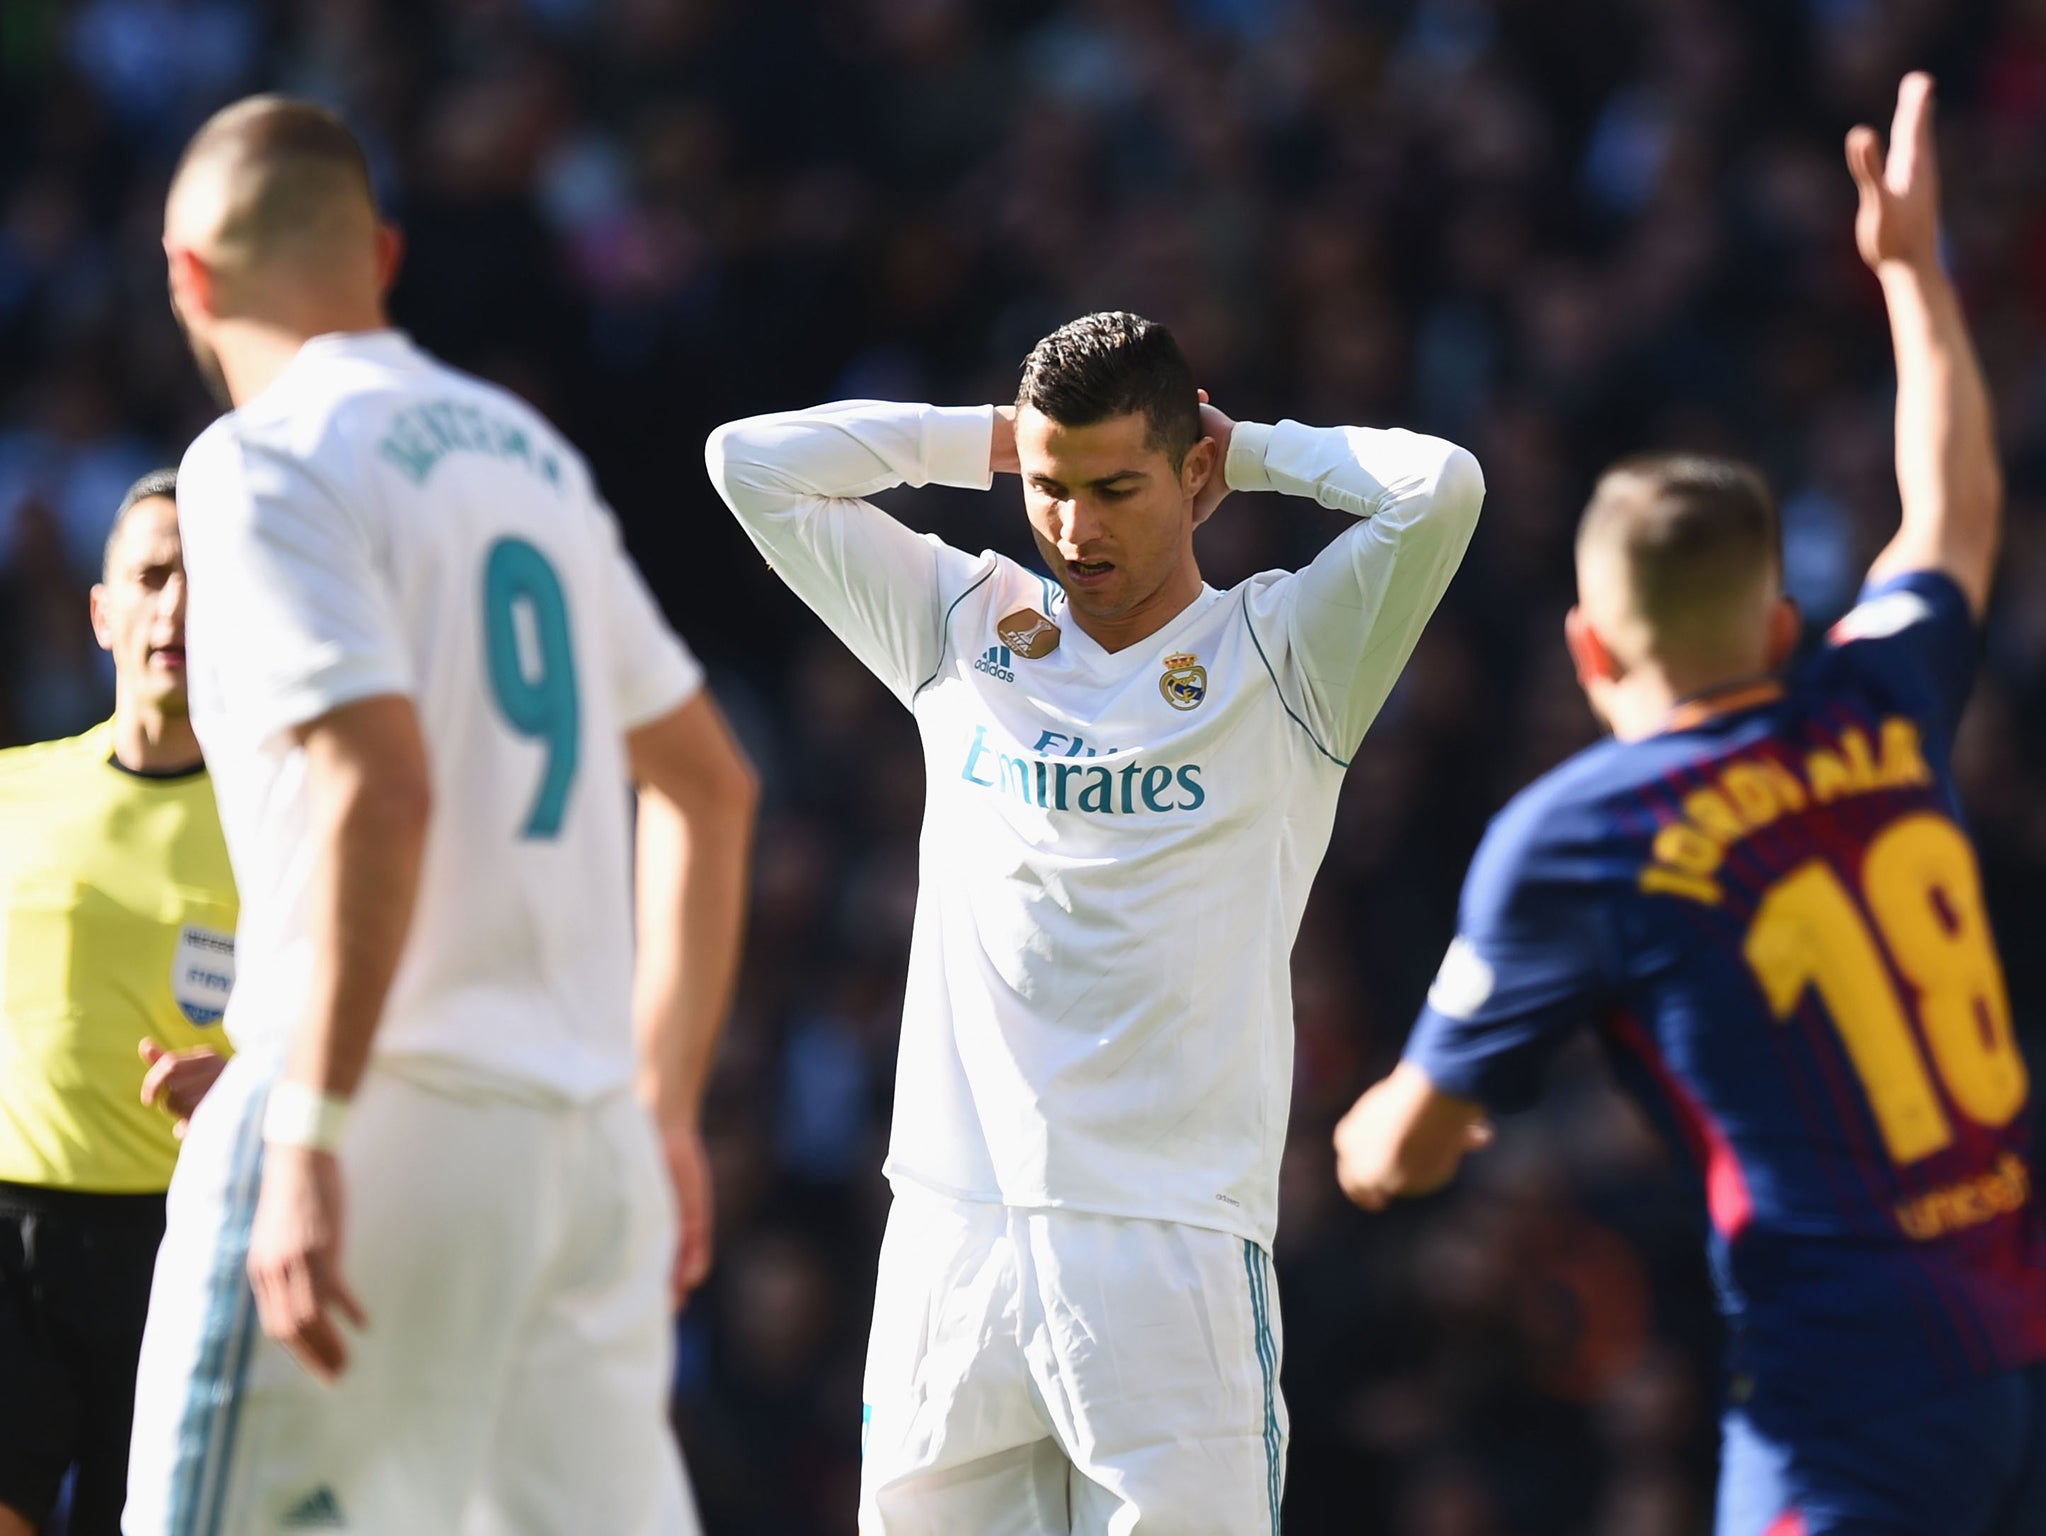 Ronaldo's future could well lie away from Real Madrid